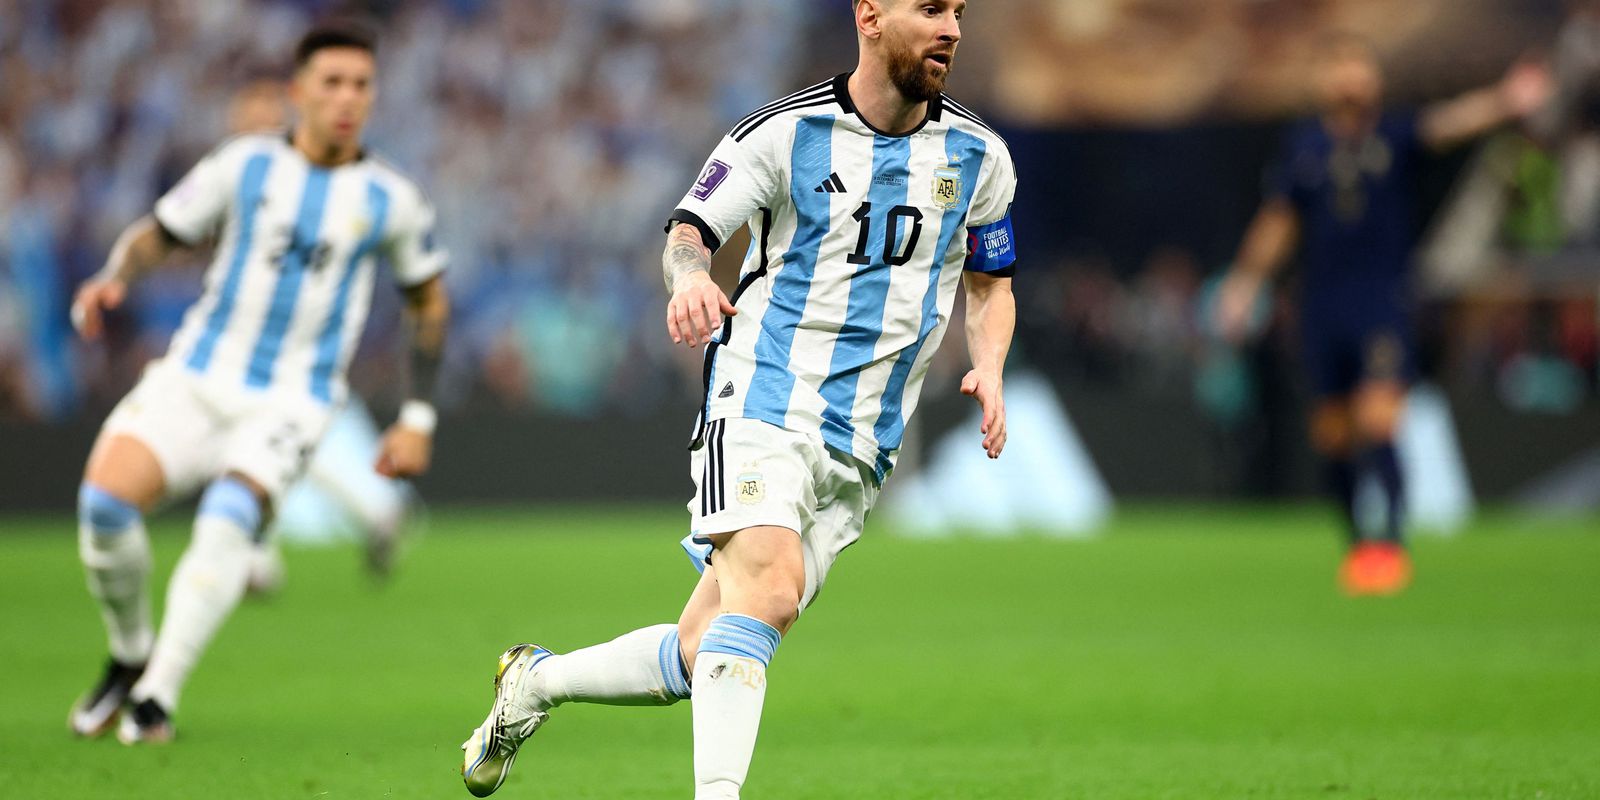 Messi is isolated as the player with the most appearances in World Cups